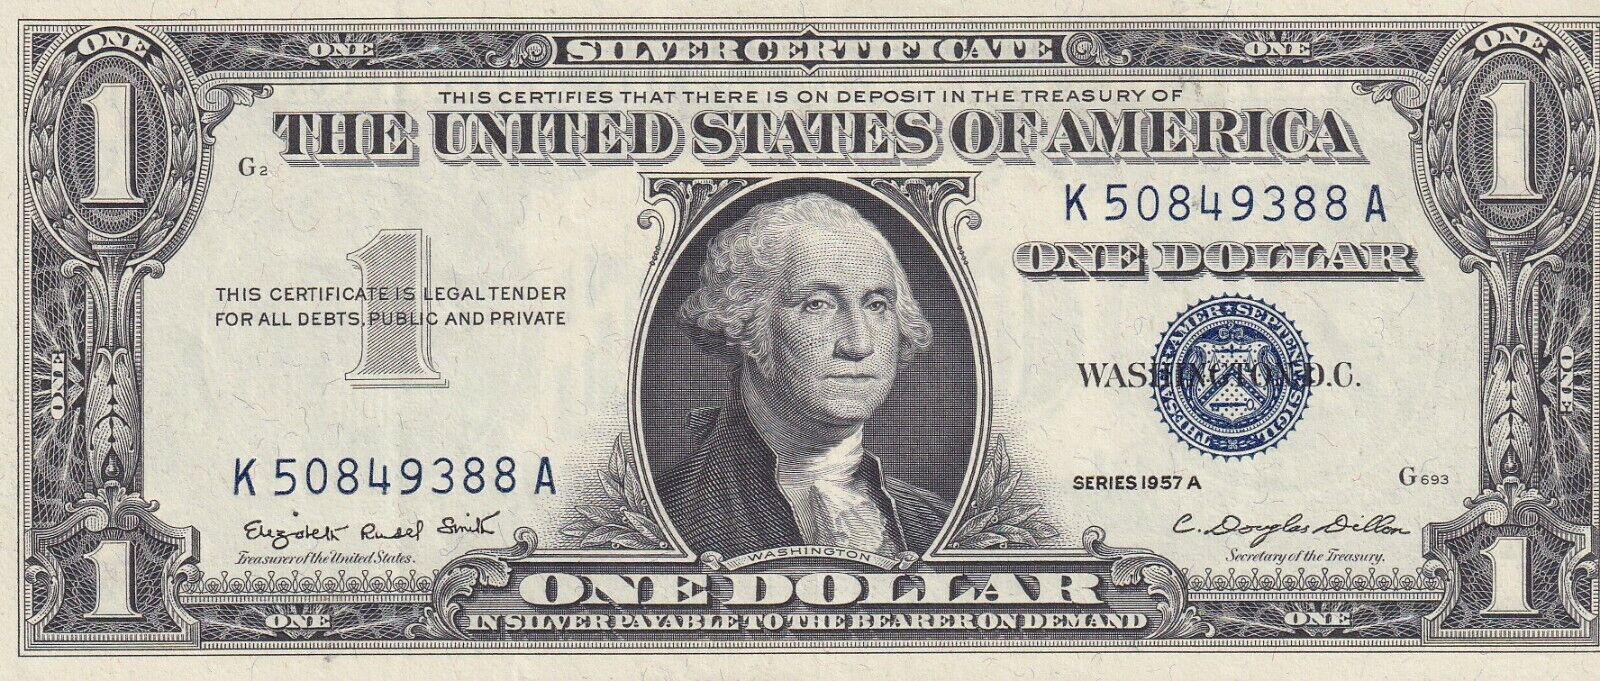 K50849388A  1957A ONE DOLLAR SILVER CERTIFICATE IN EXCELLENT CONDITION